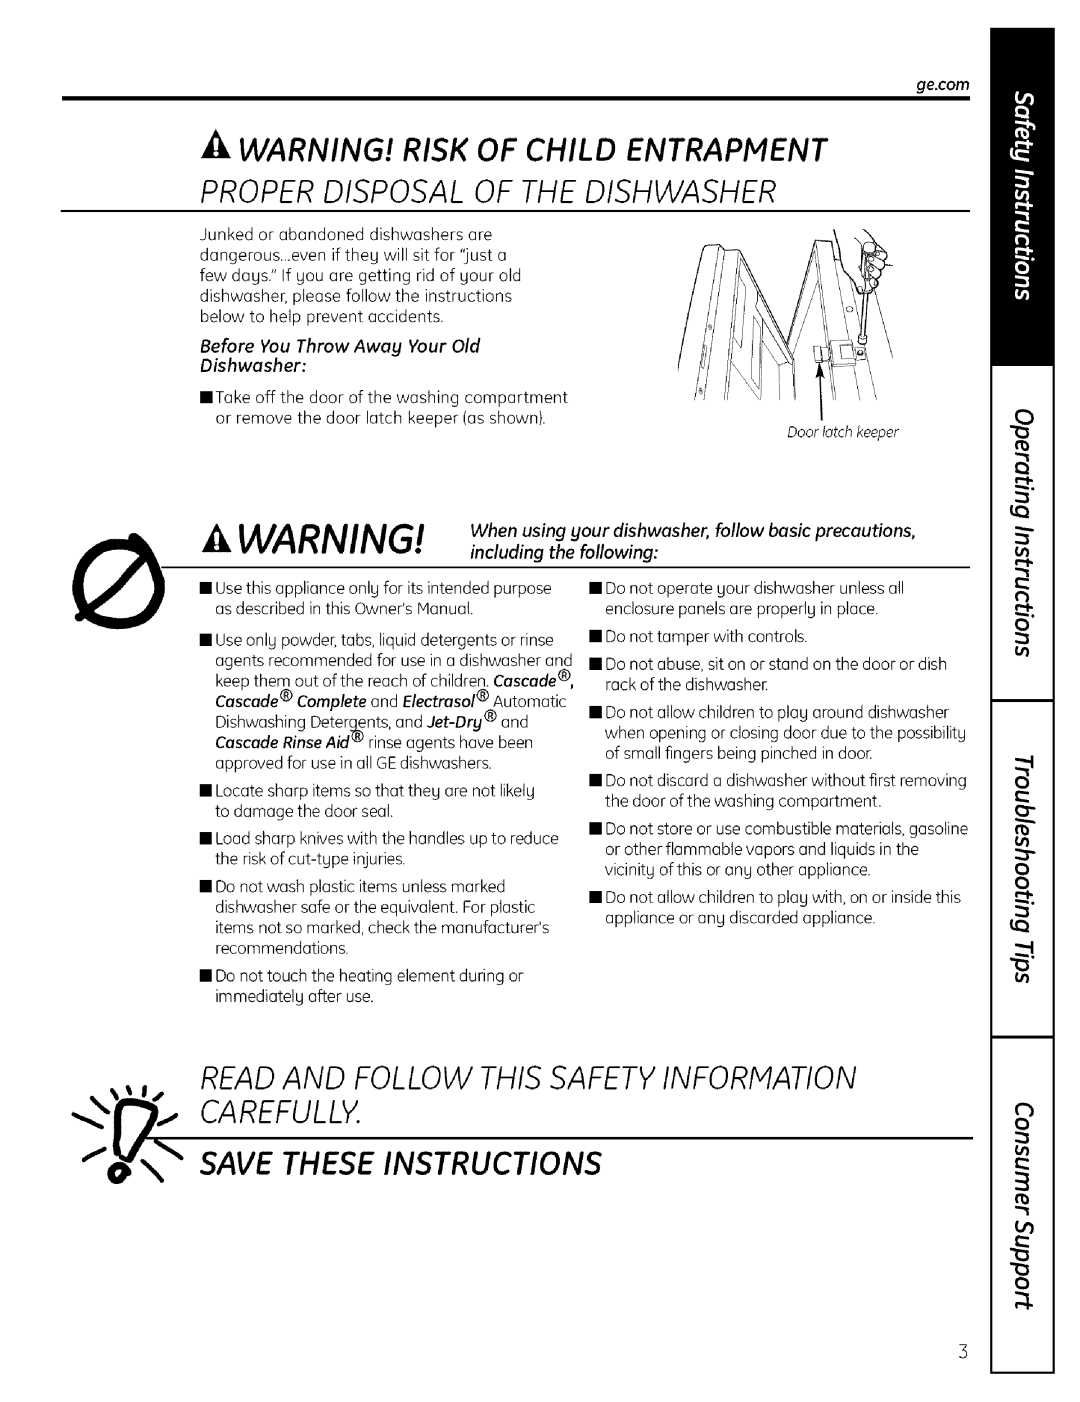 GE EDWSO00 Proper Disposal Of The Dishwasher, Readand Follow This Safetyinformation Carefully, Save These Instructions 